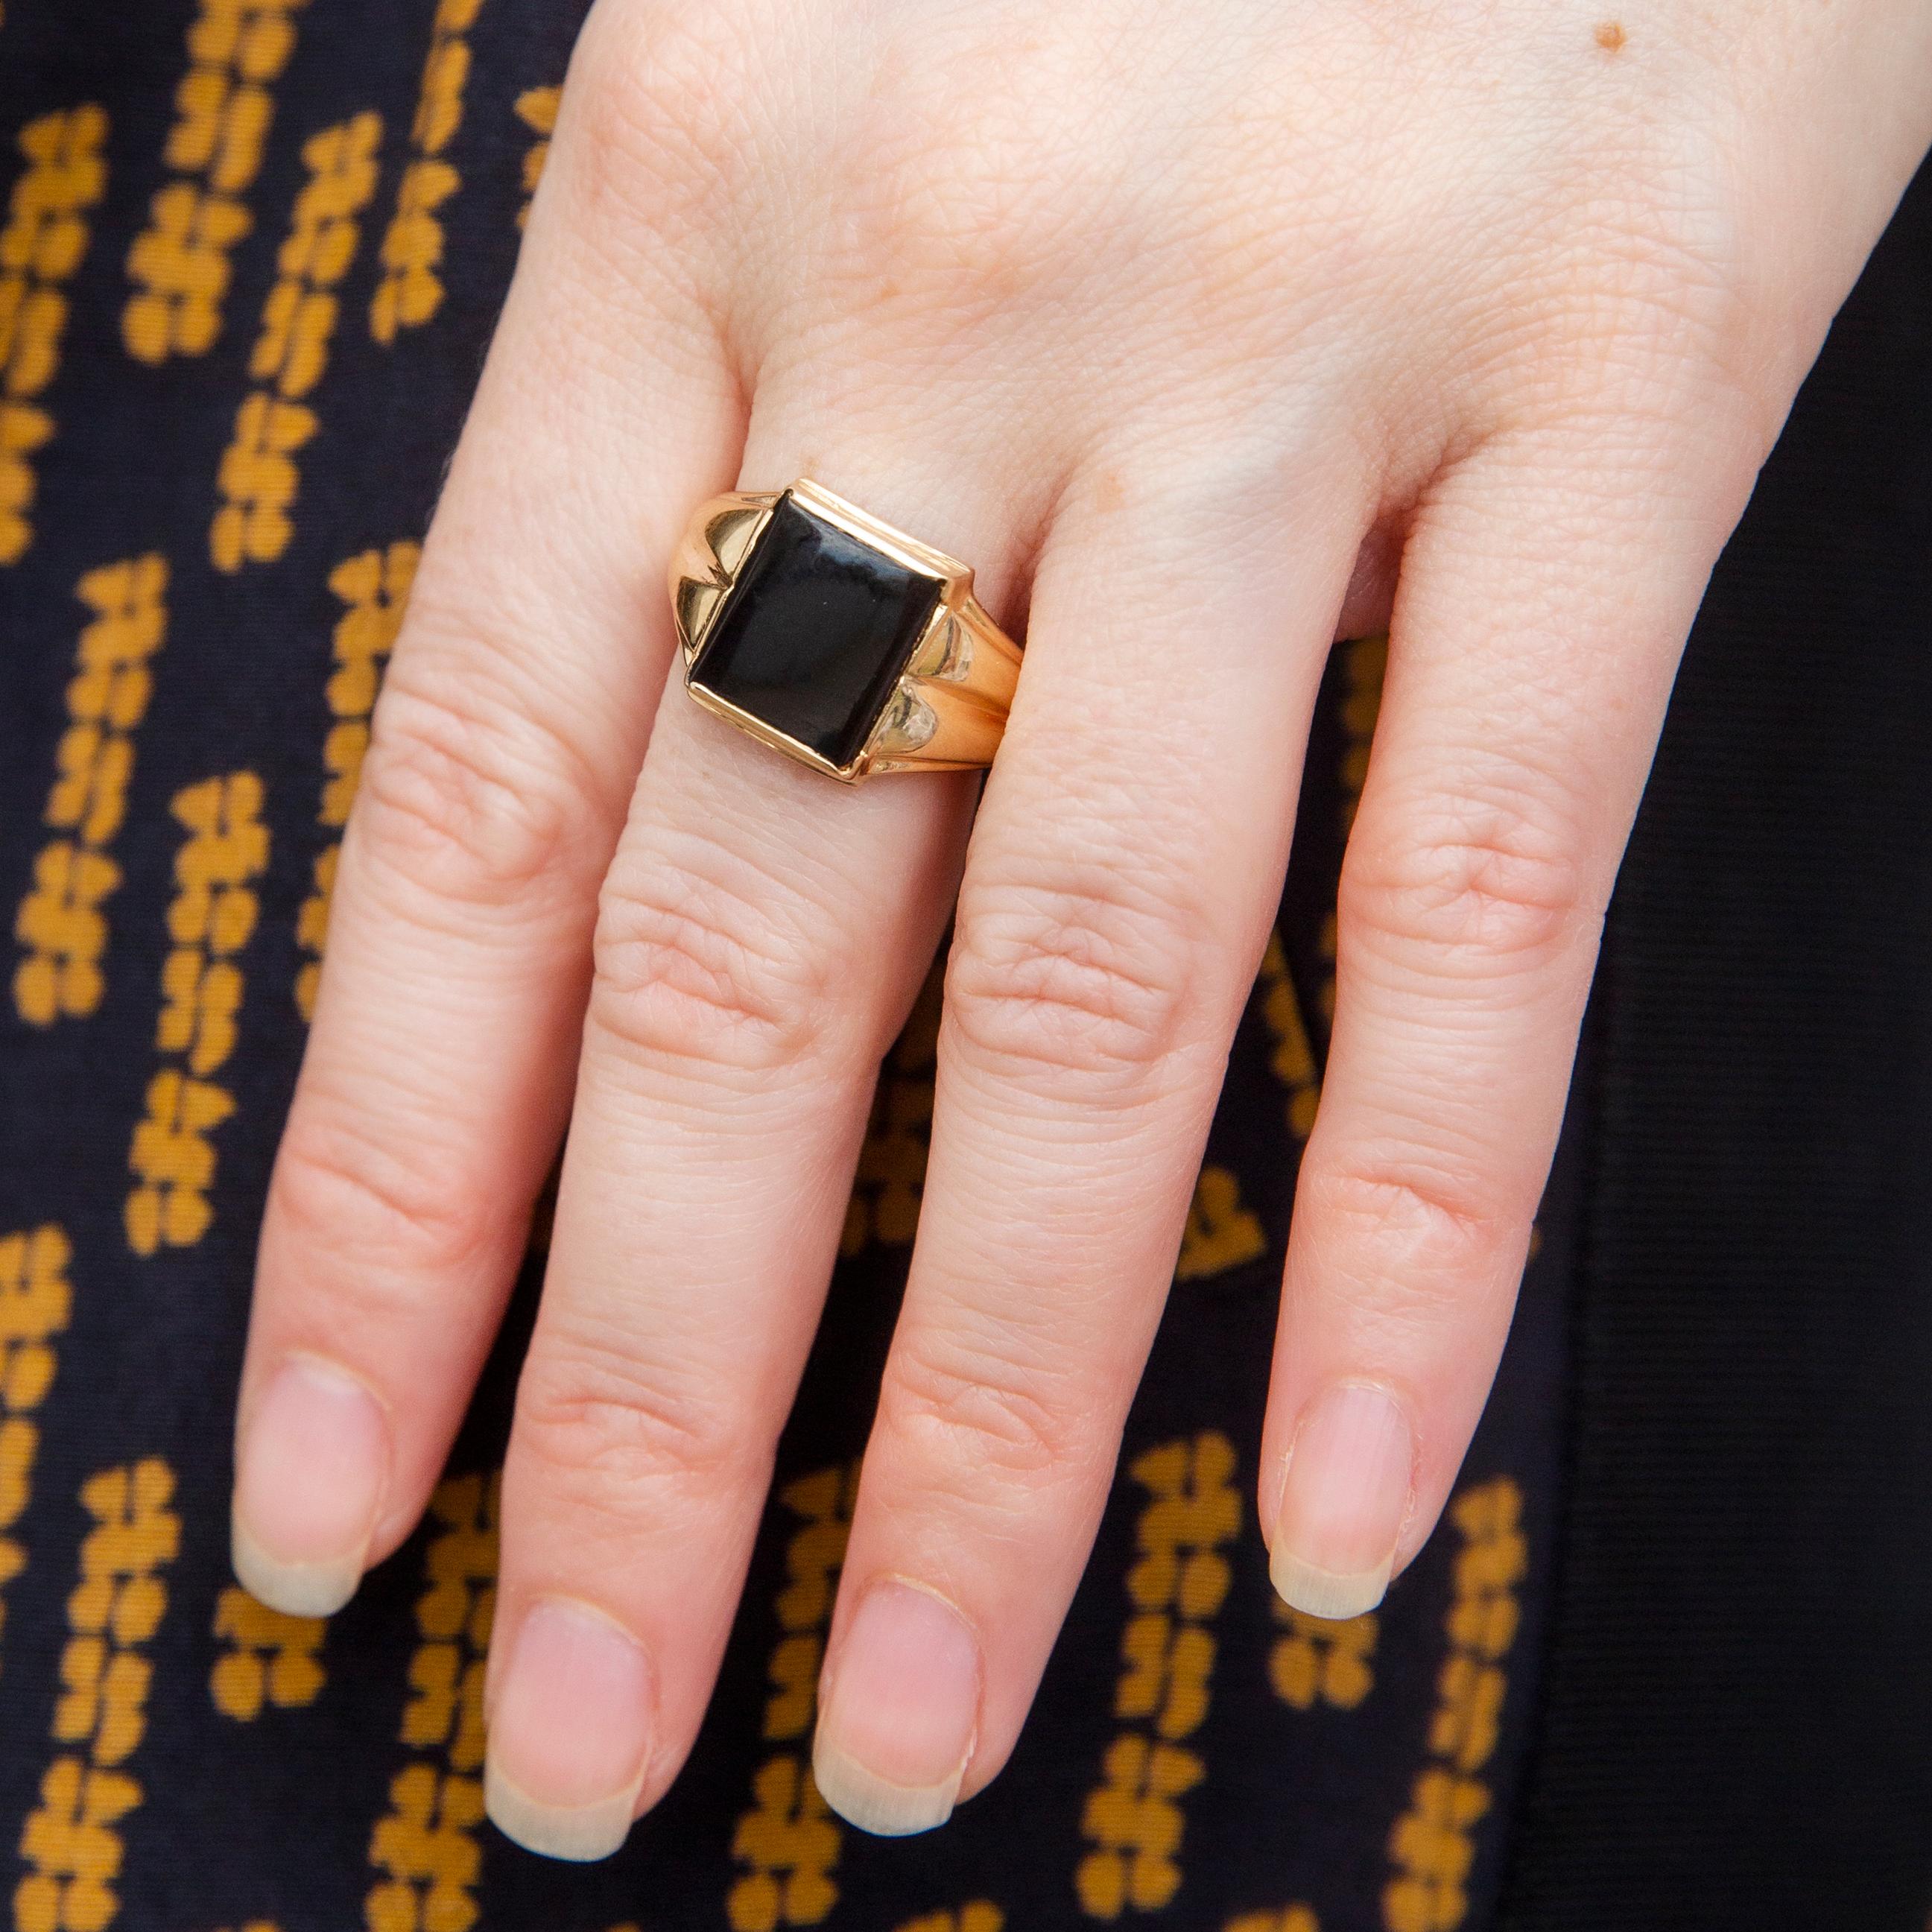 Expertly crafted in 9 carat gold, The Melia Ring makes a strong statement. A wide grooved band that lifts and frames a midnight onyx presenting an unadorned visage to the world. An urbane inclusion in any collection.

The Melia Ring Gem Details
The